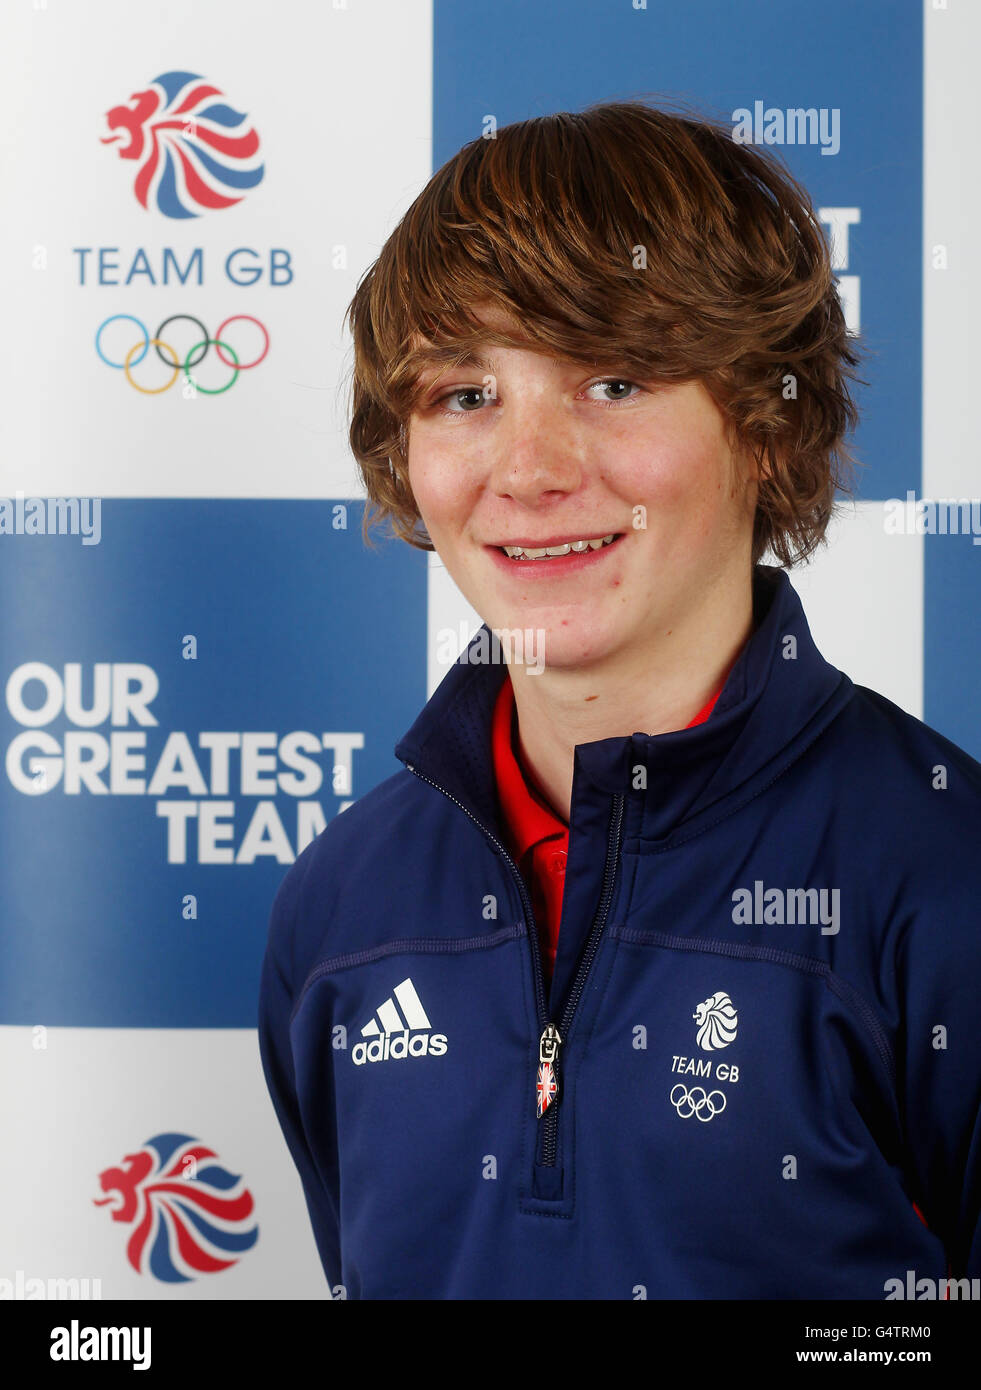 Lewis Courtier-Jones, competing in the Snowboarding at the Innsbruck 2012 Winter Youth Olympic Games which starts on January 13th. Stock Photo